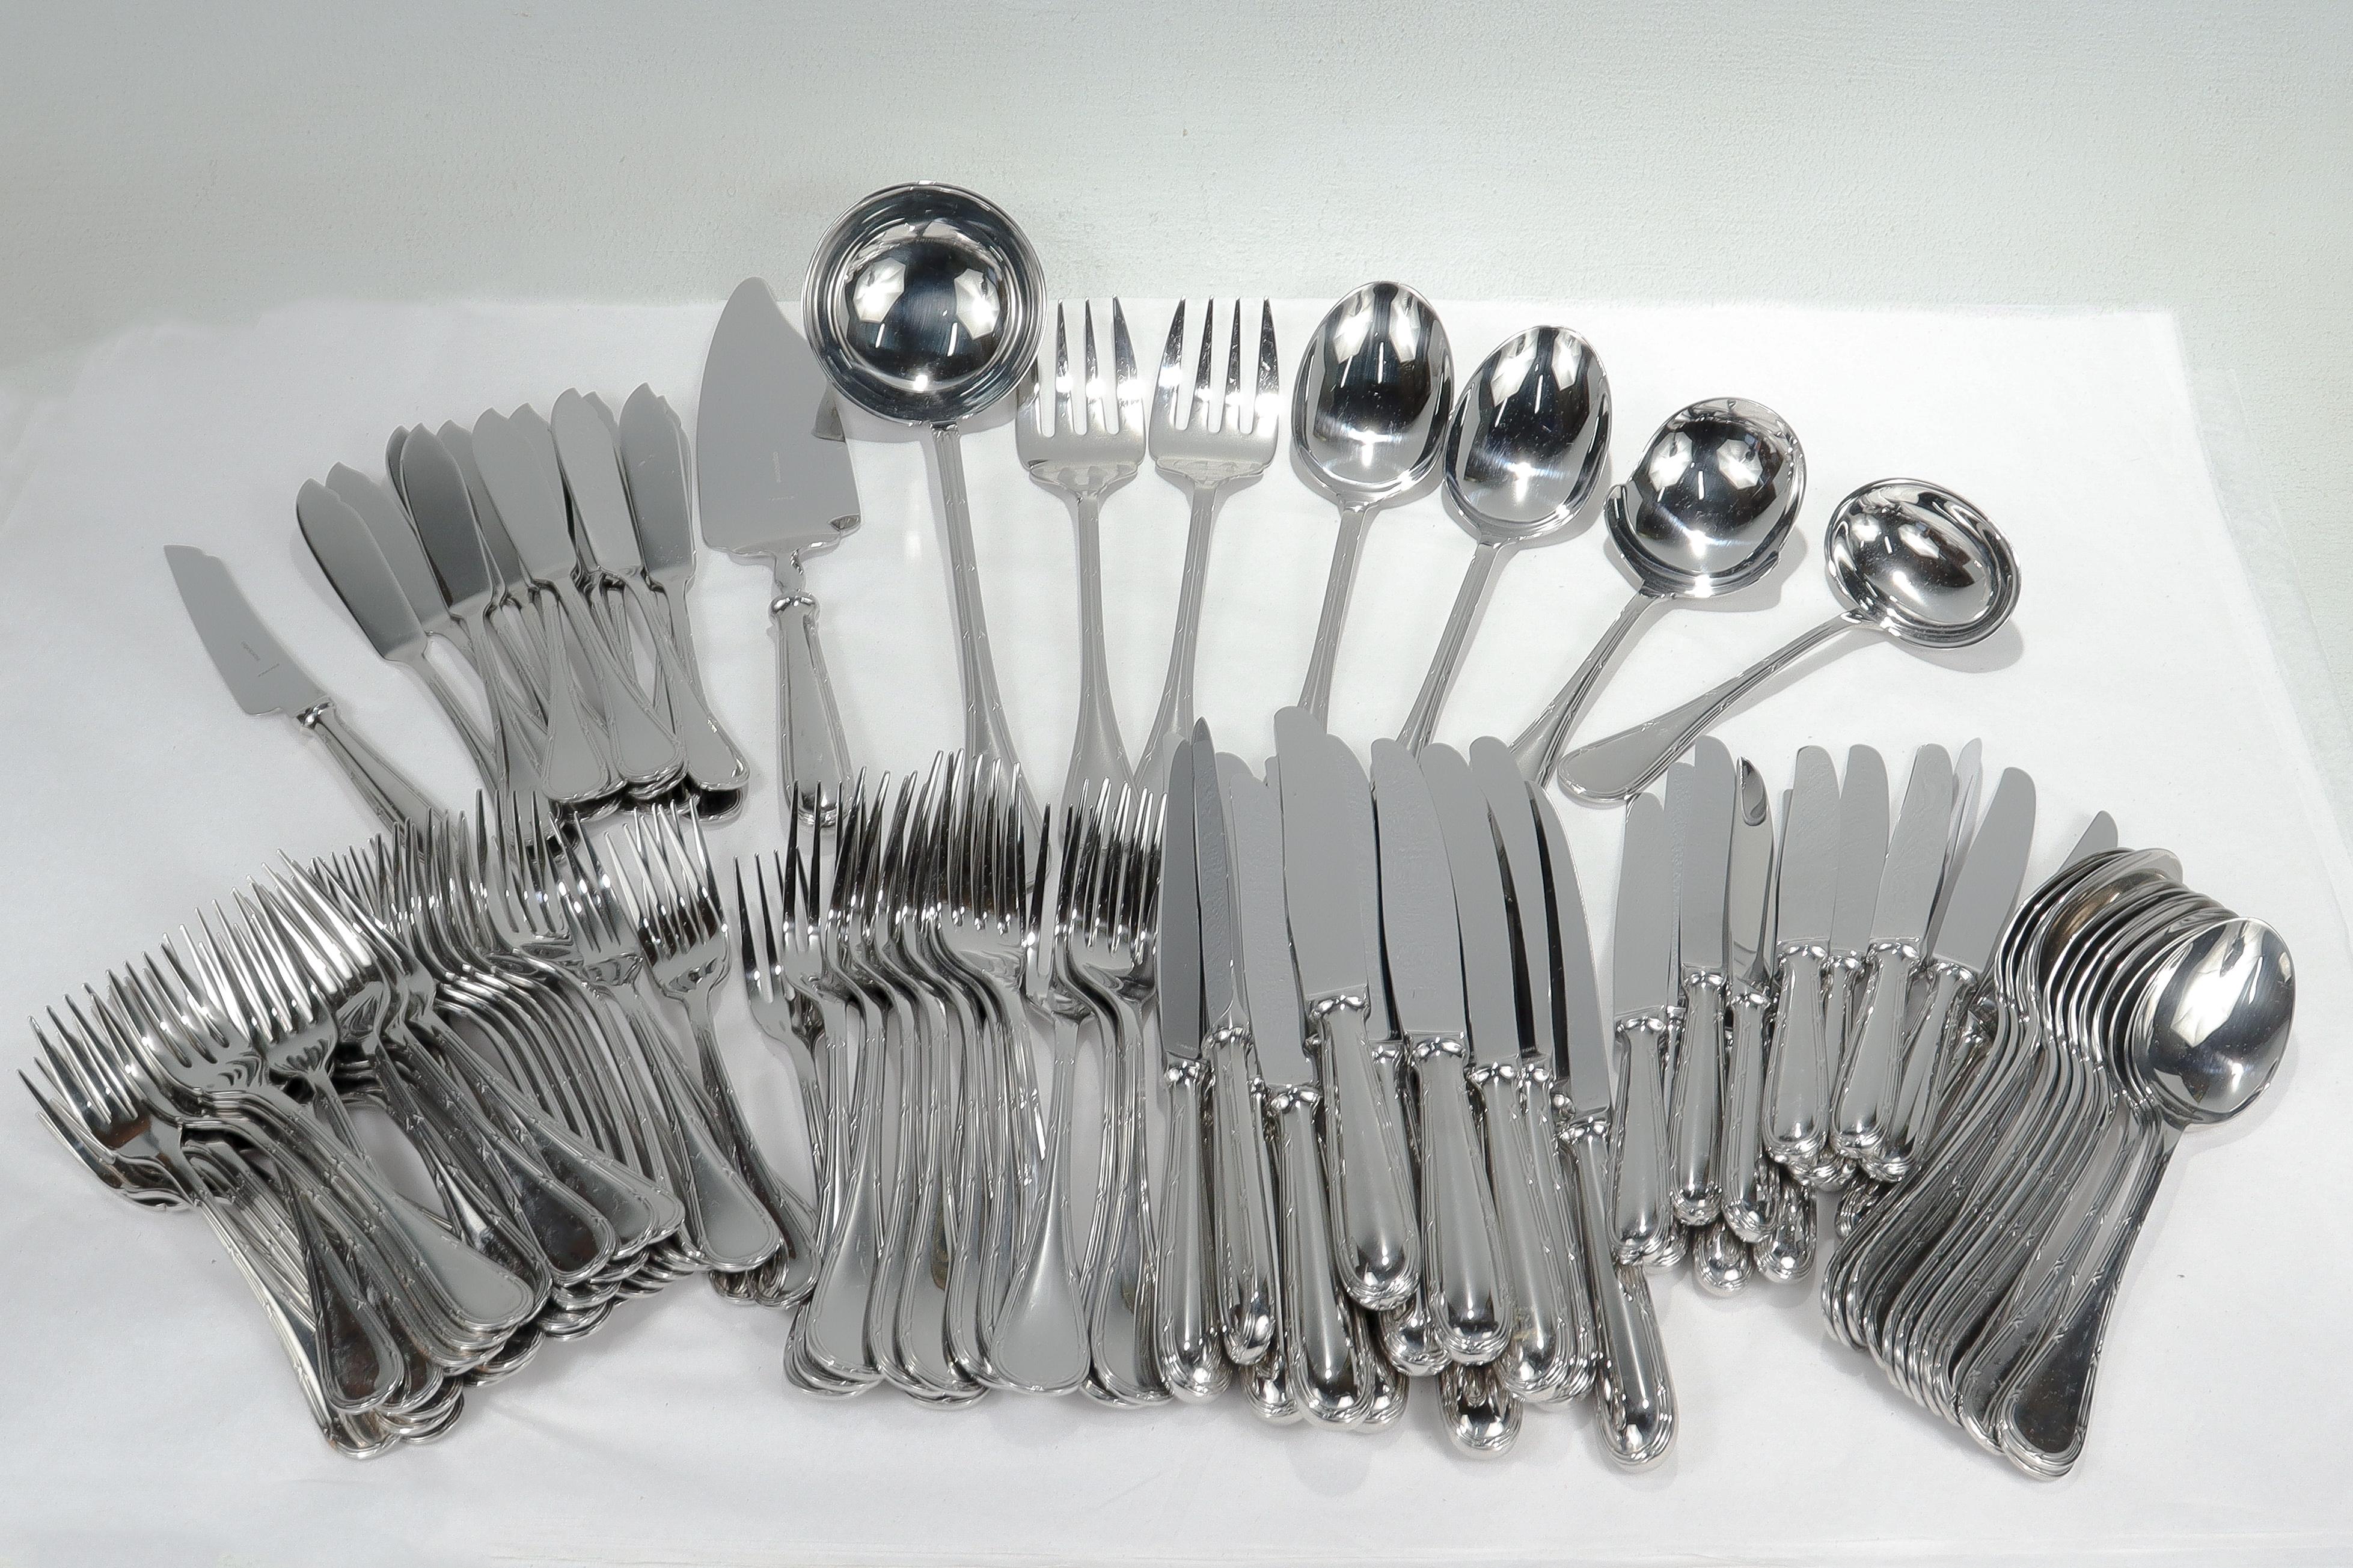 Modern 105 Piece Christofle Pastorale Stainless Steel Dinner Flatware Service for 12